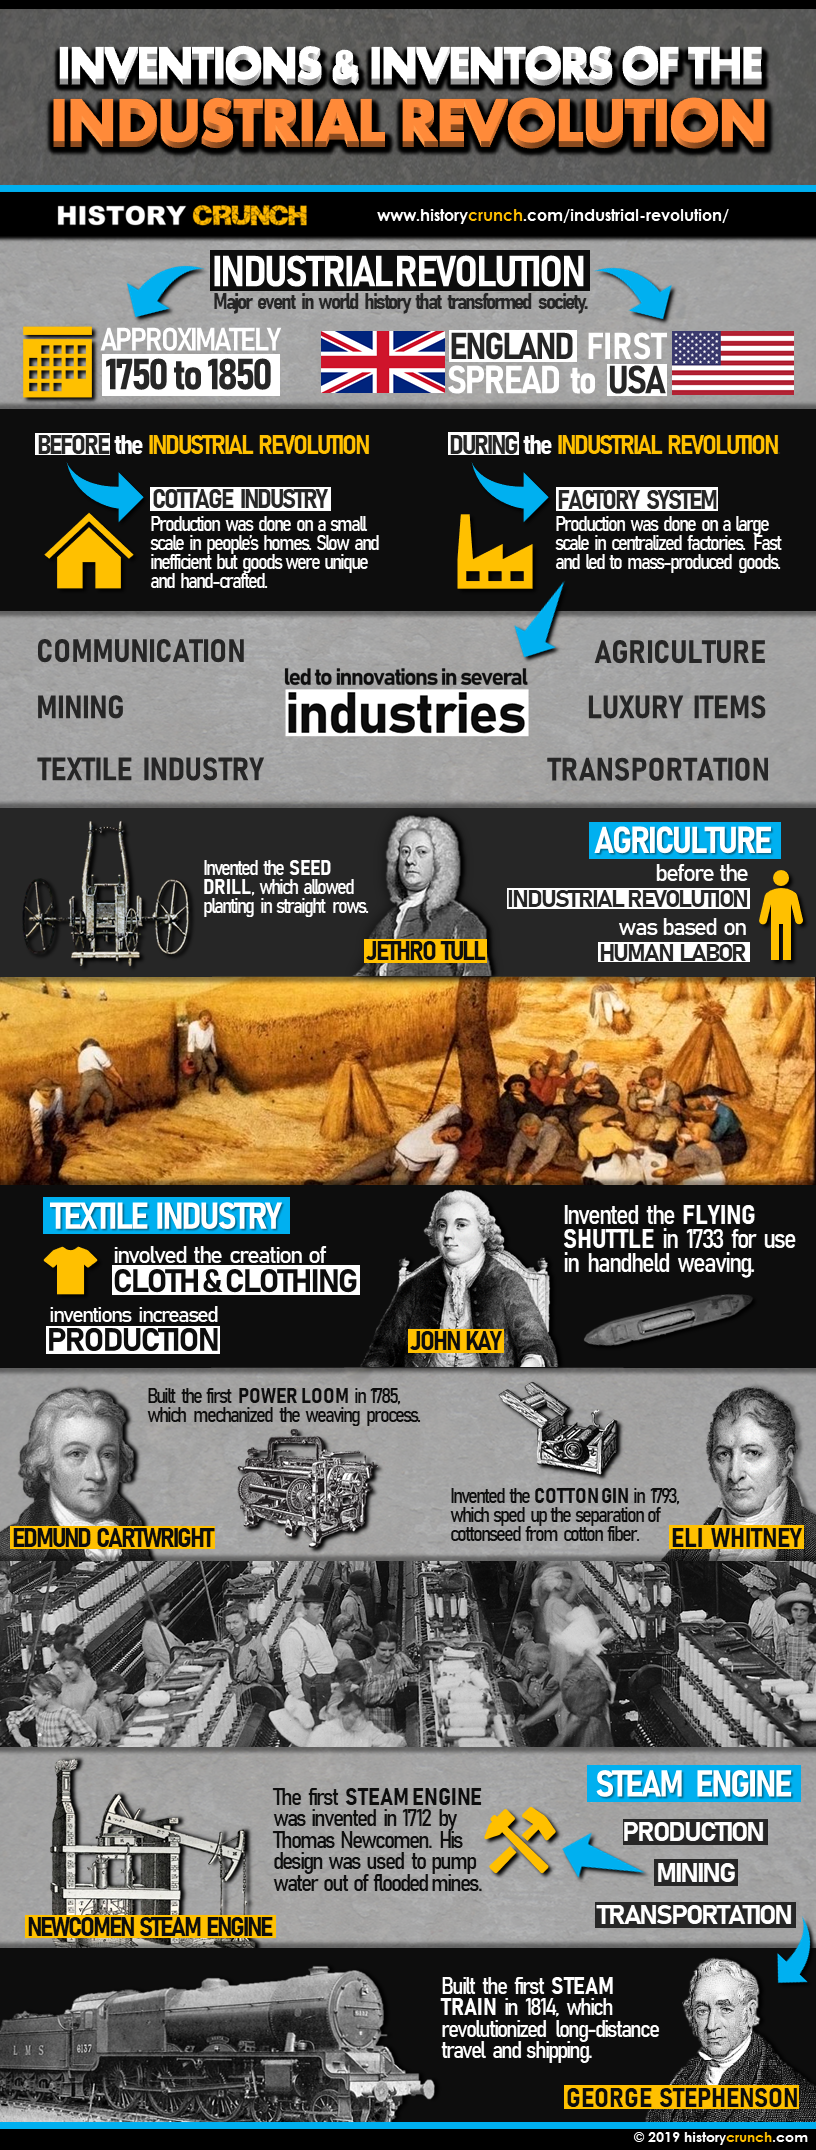 Inventions of the Industrial Revolution Infographic